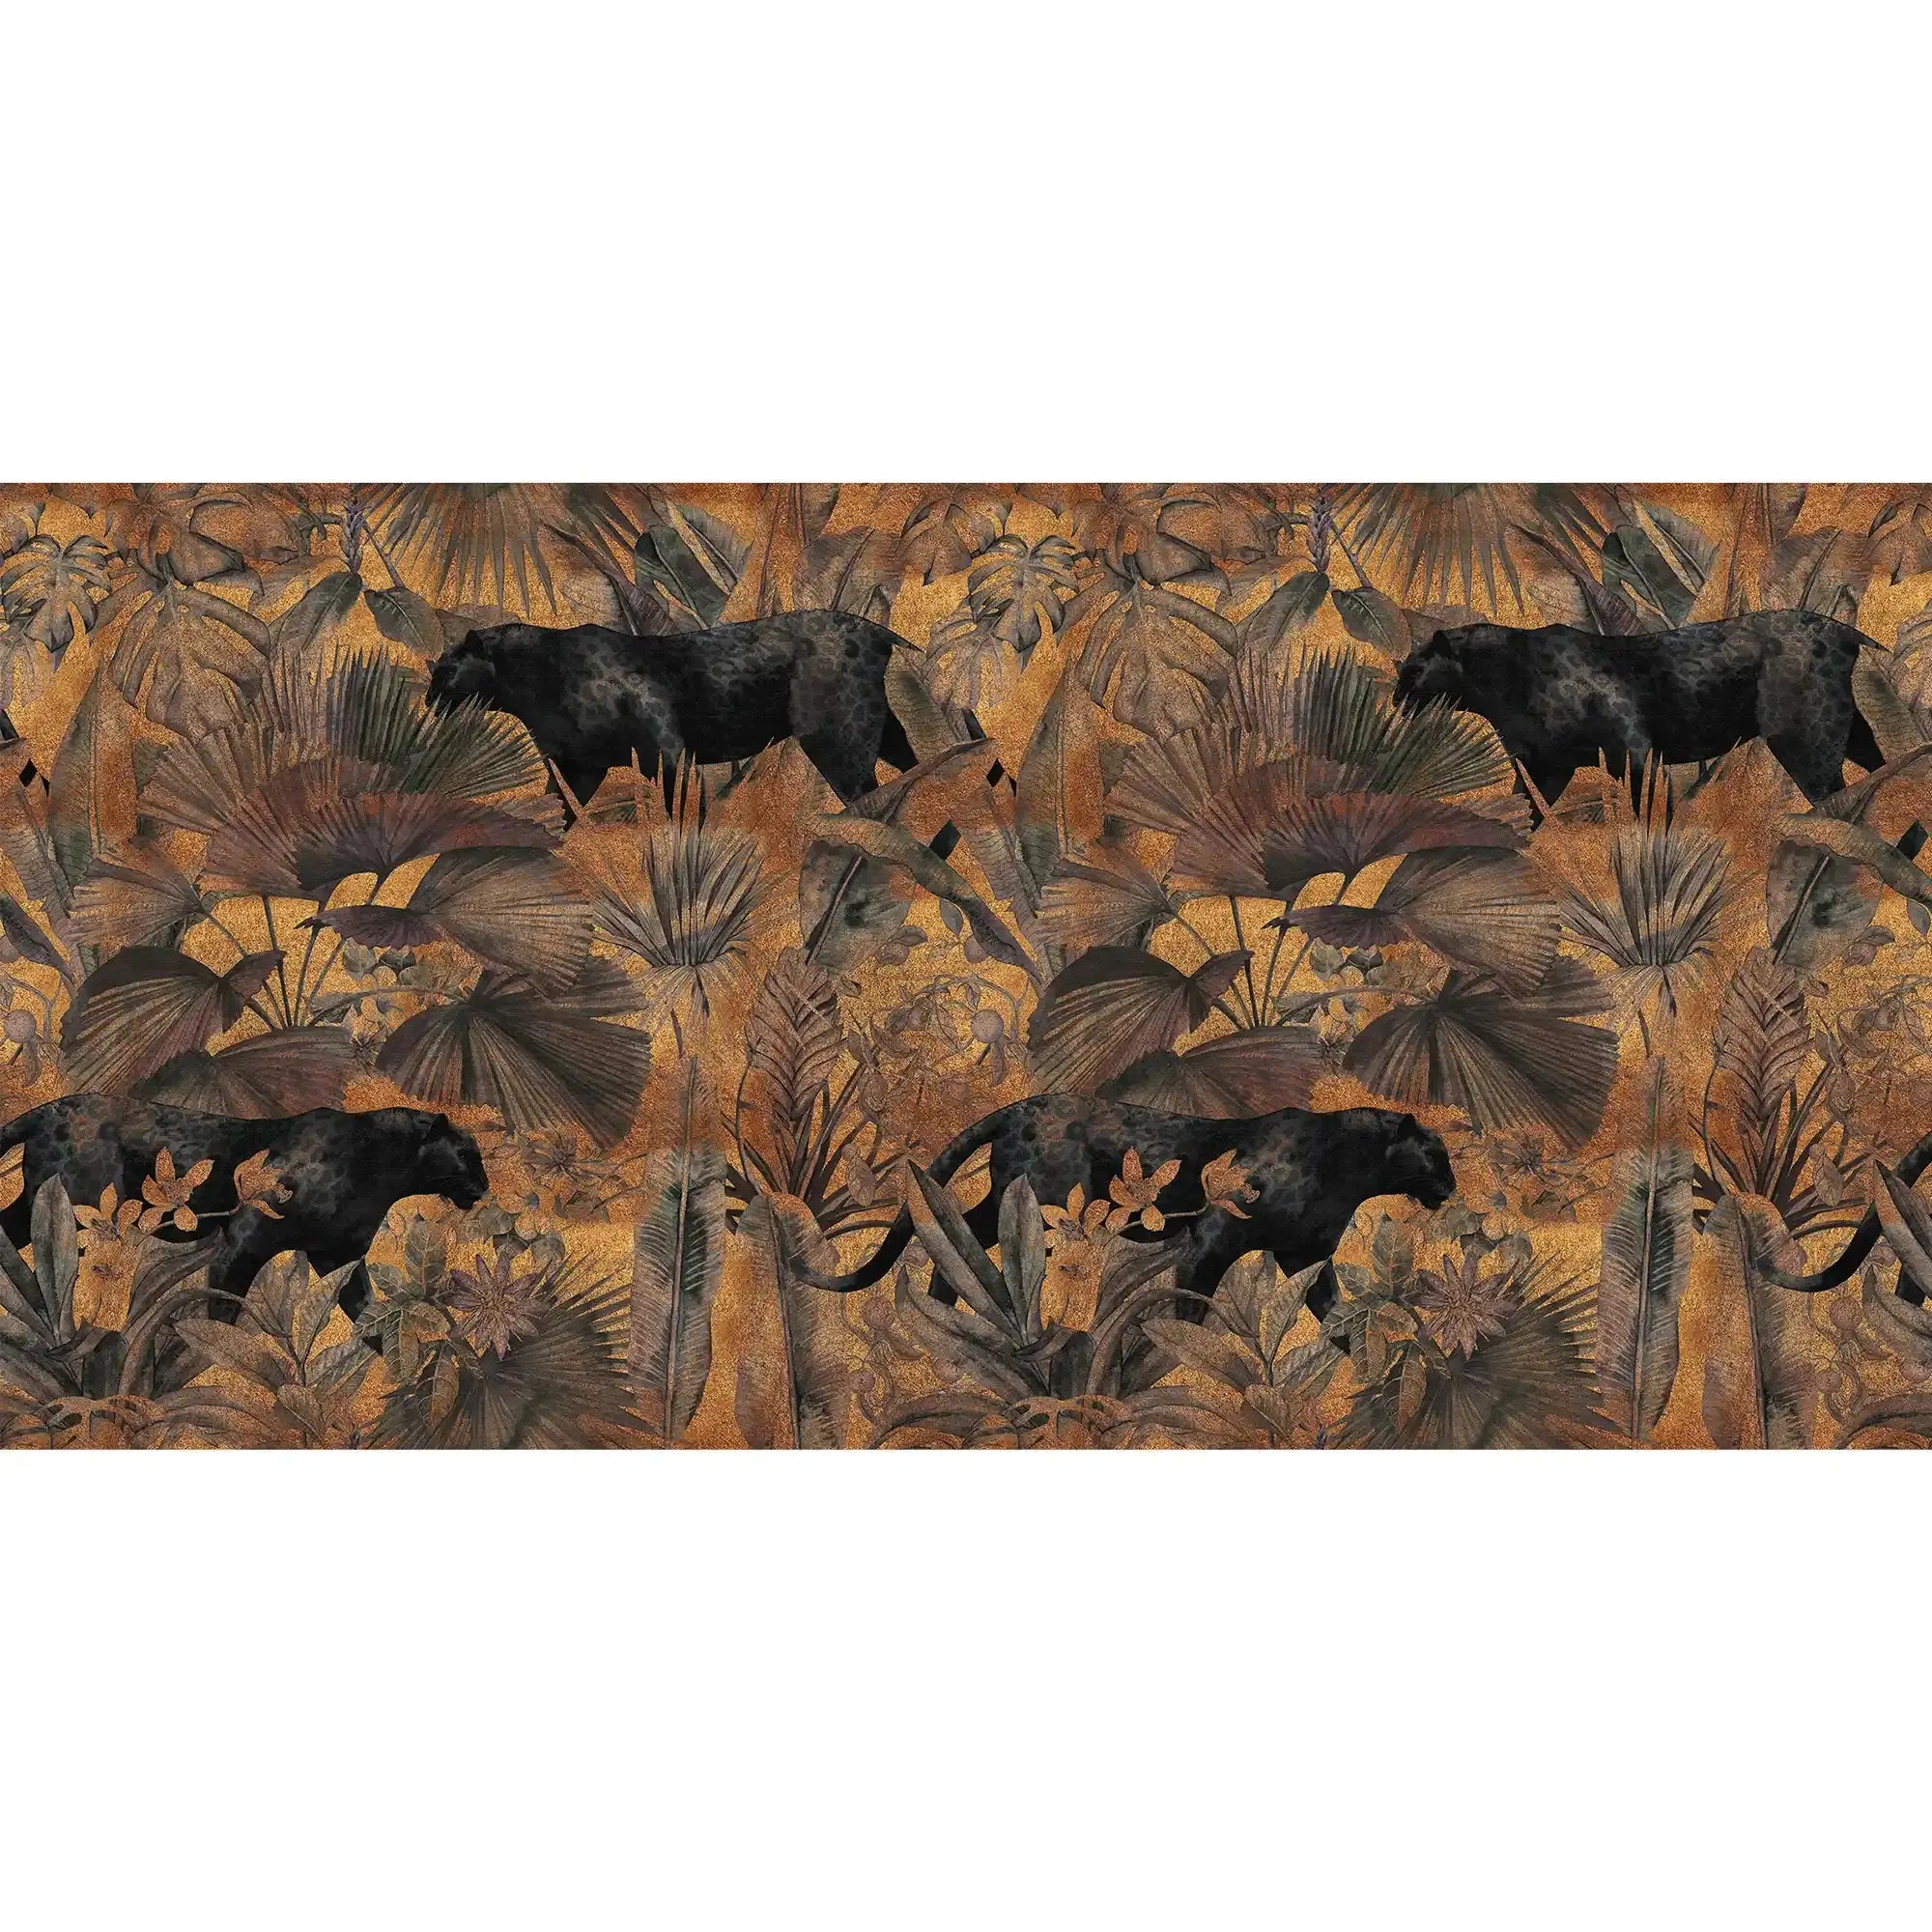 3076-B / Botanical Wallpaper with Panther Theme: Adhesive Mural for Wall Accent - Artevella